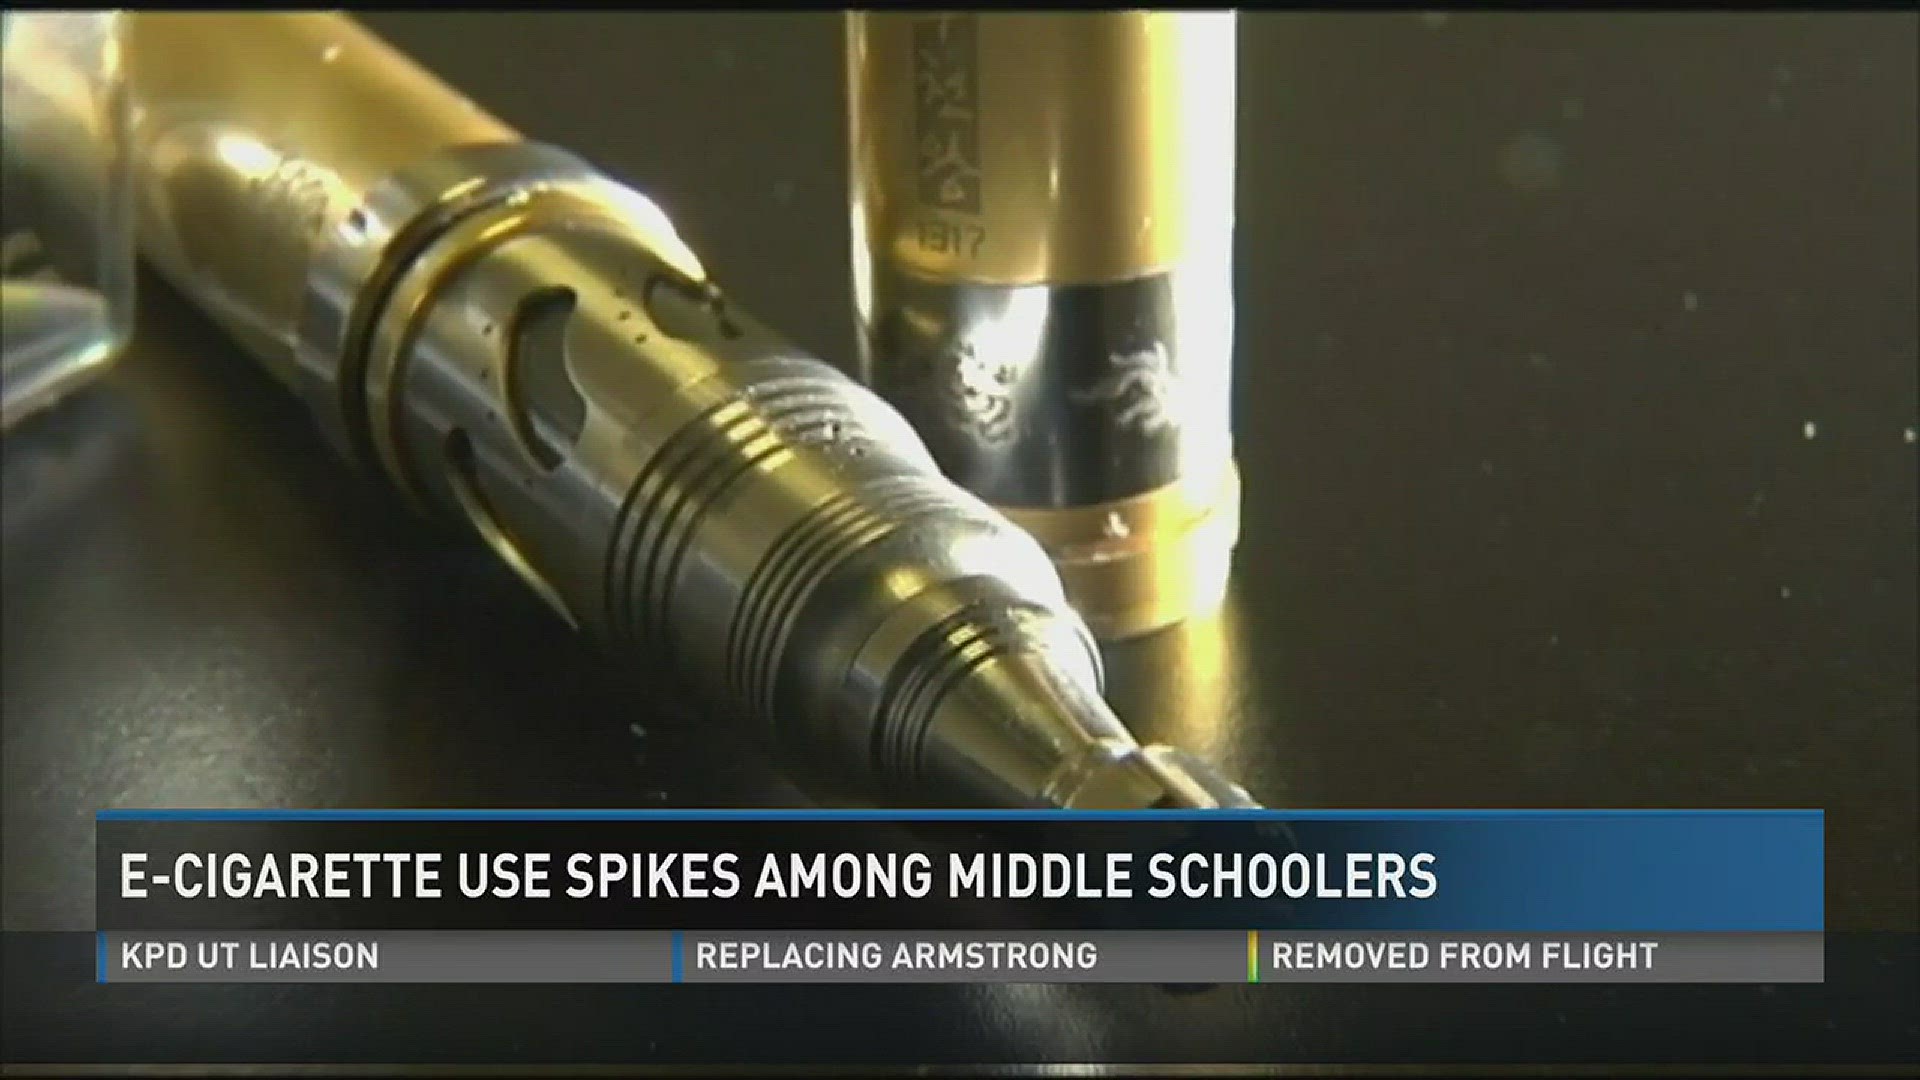 A CDC study shows that E-cigarette use is increasing among middle and high schoolers.